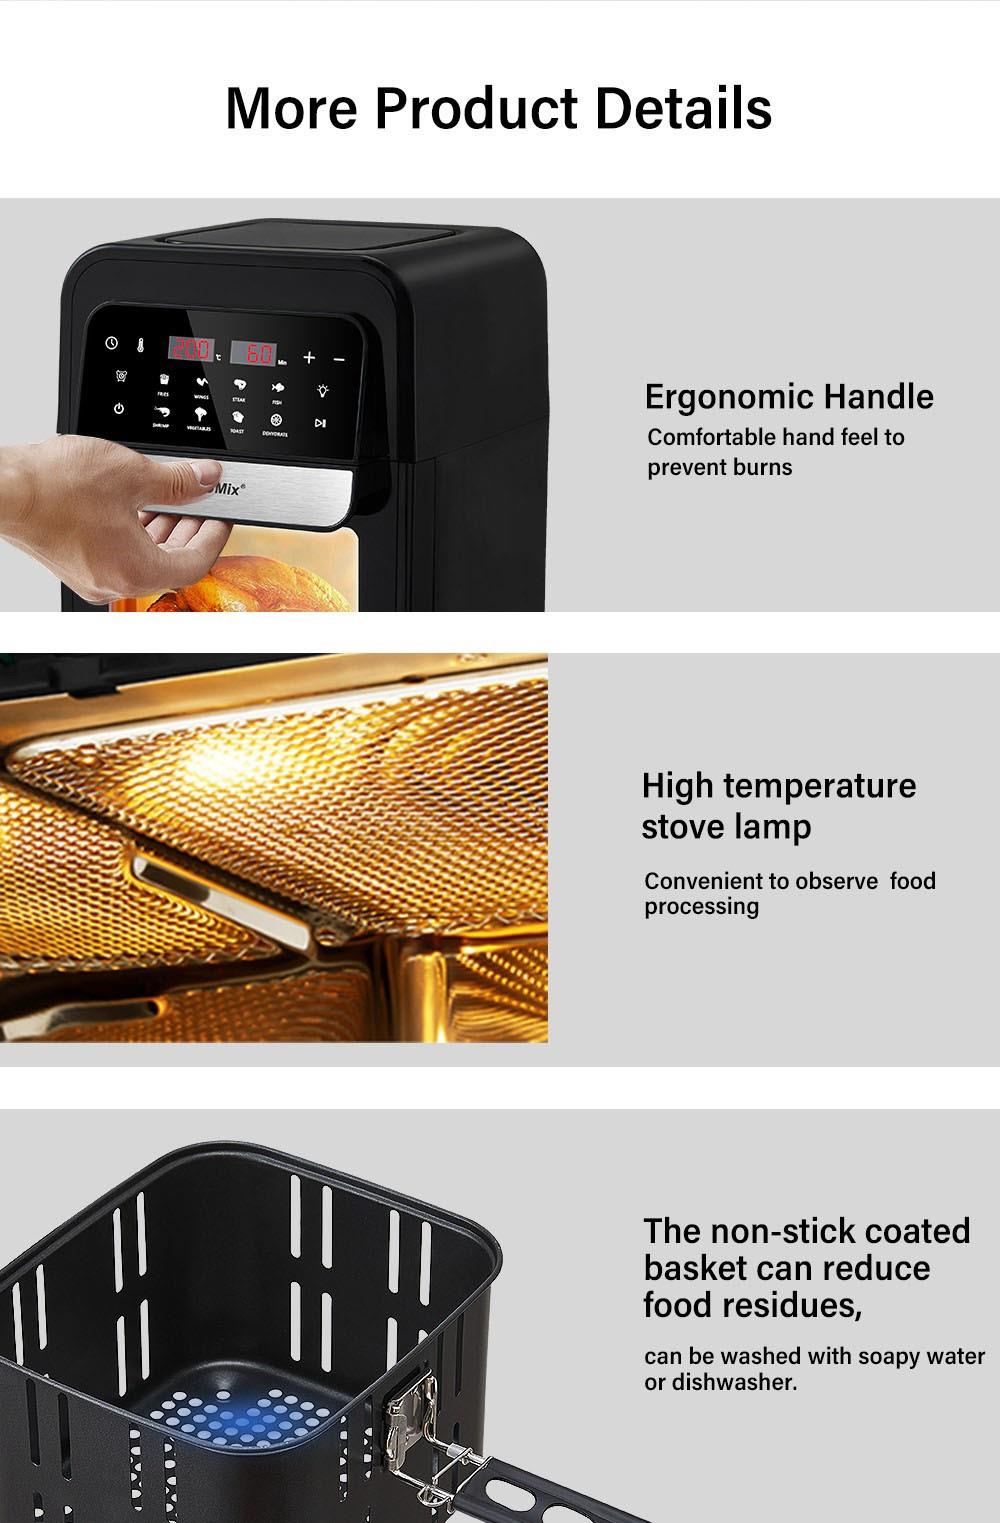 BioloMix AF536 Multifunctional Air Fryer, 1400W Electric Oven, 7L Capacity, 8 Cooking Presets, Touch Screen, 60min Timer